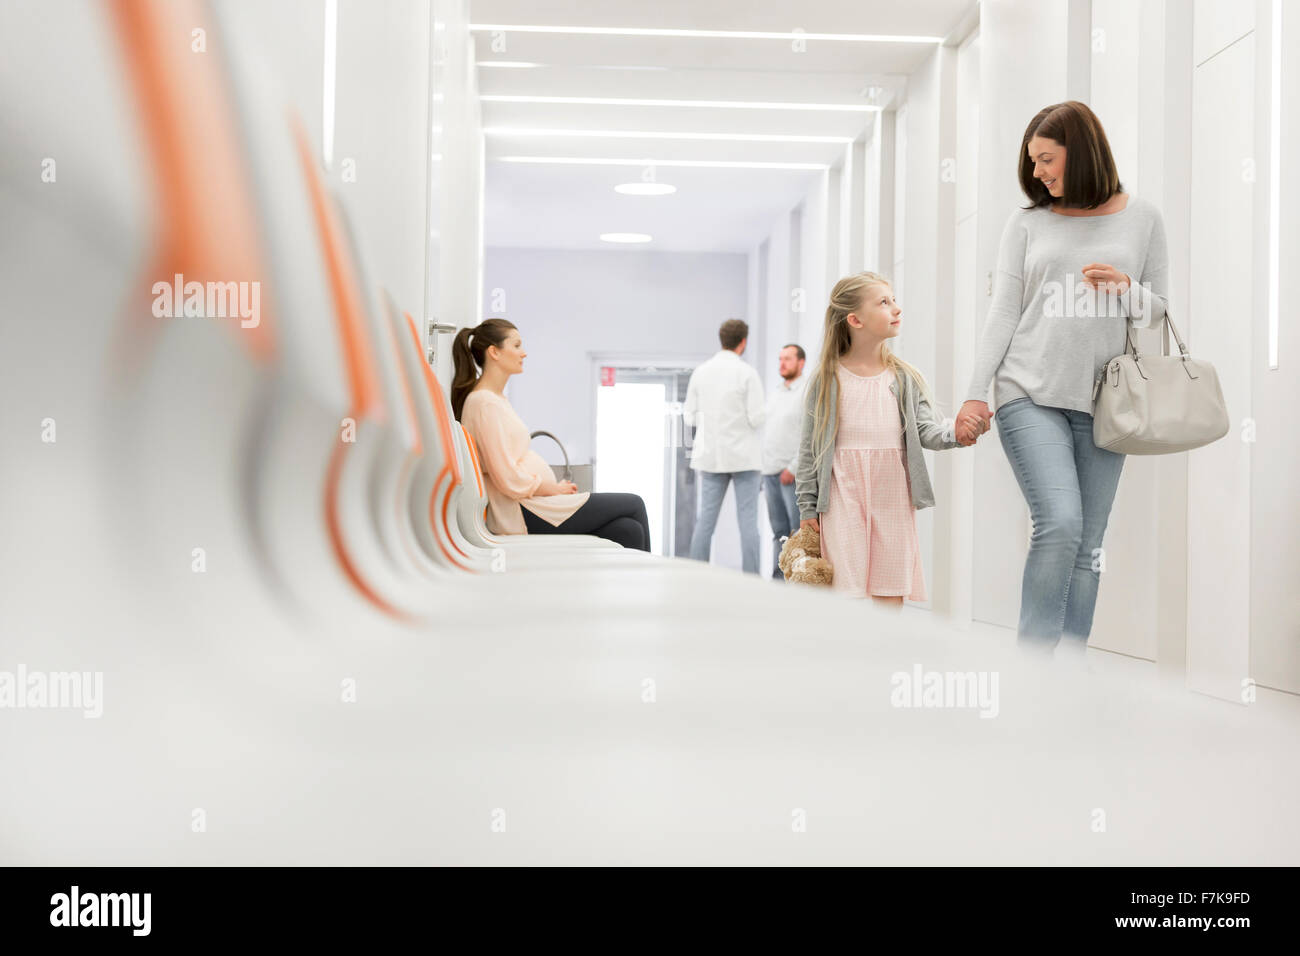 Mother and Daughter holding hands walking in hospital corridor Banque D'Images